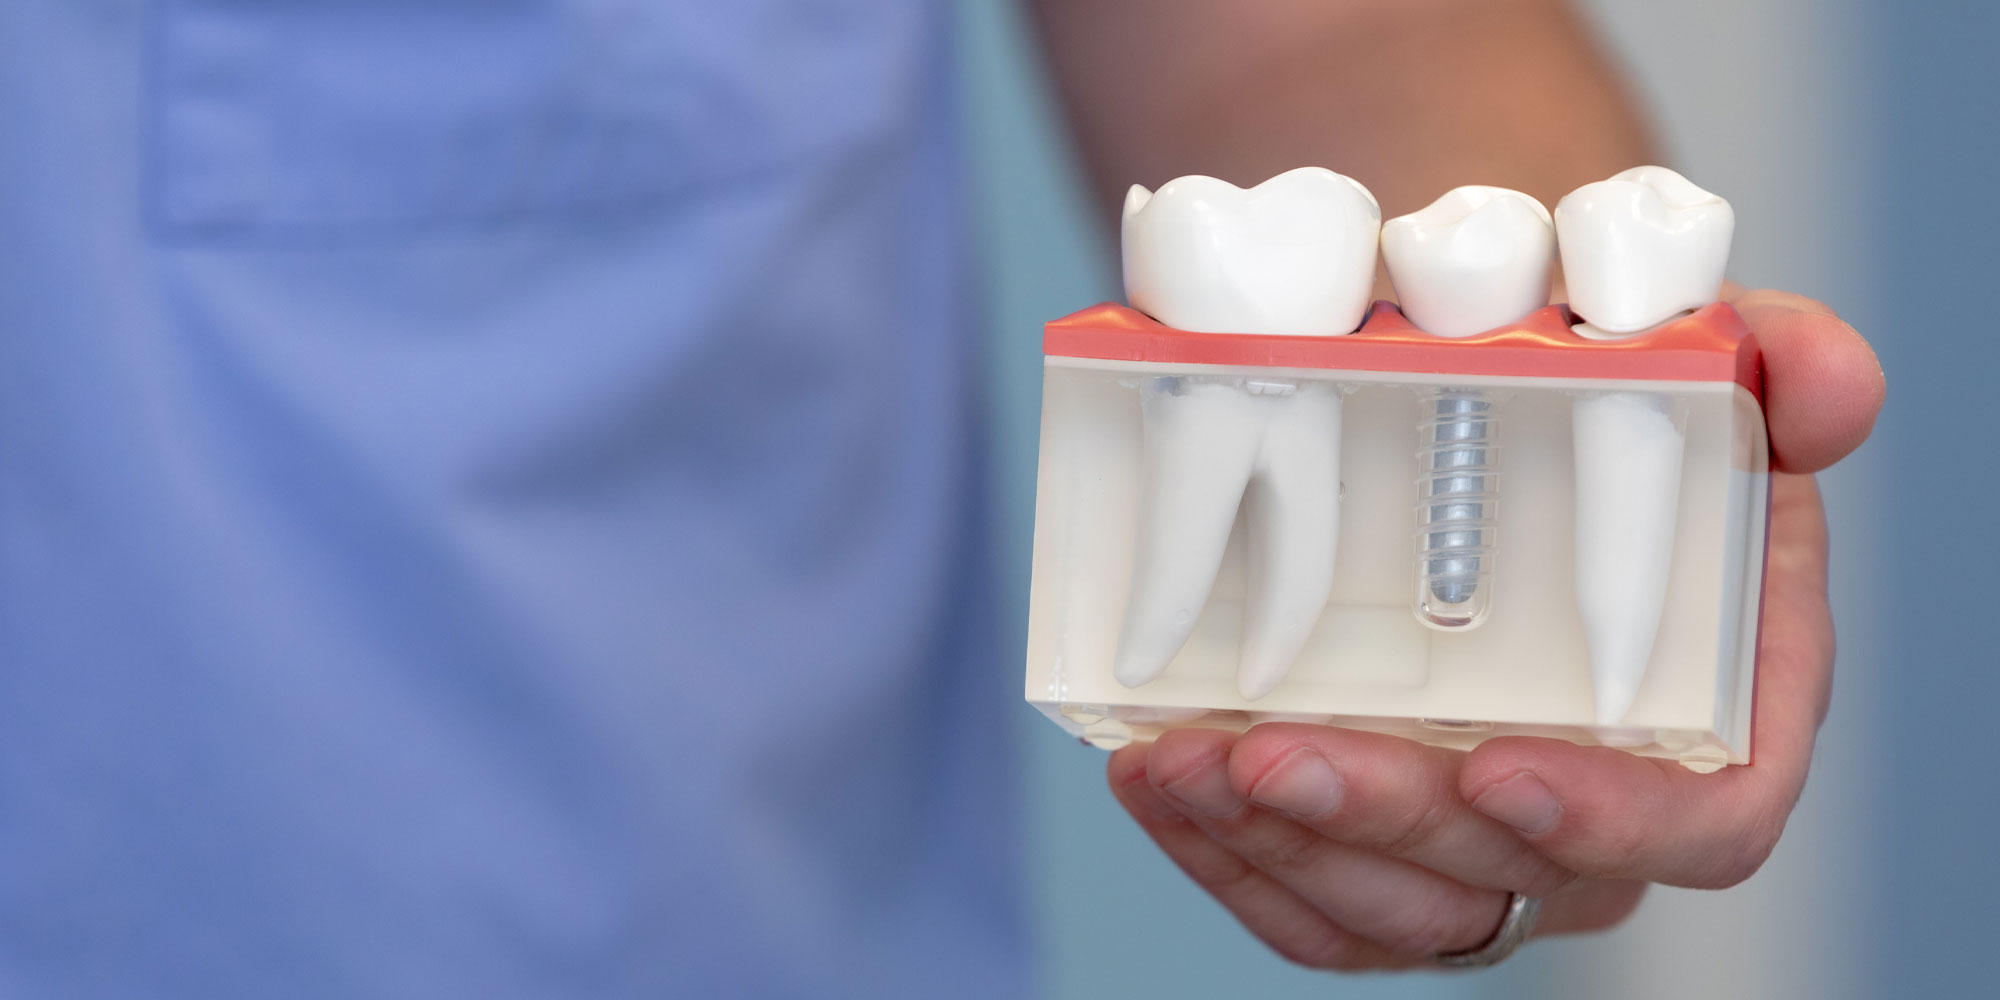 Not Sure If You Are A Candidate For Dental Implants In East Lansing, MI? We Can Help You Figure That Out